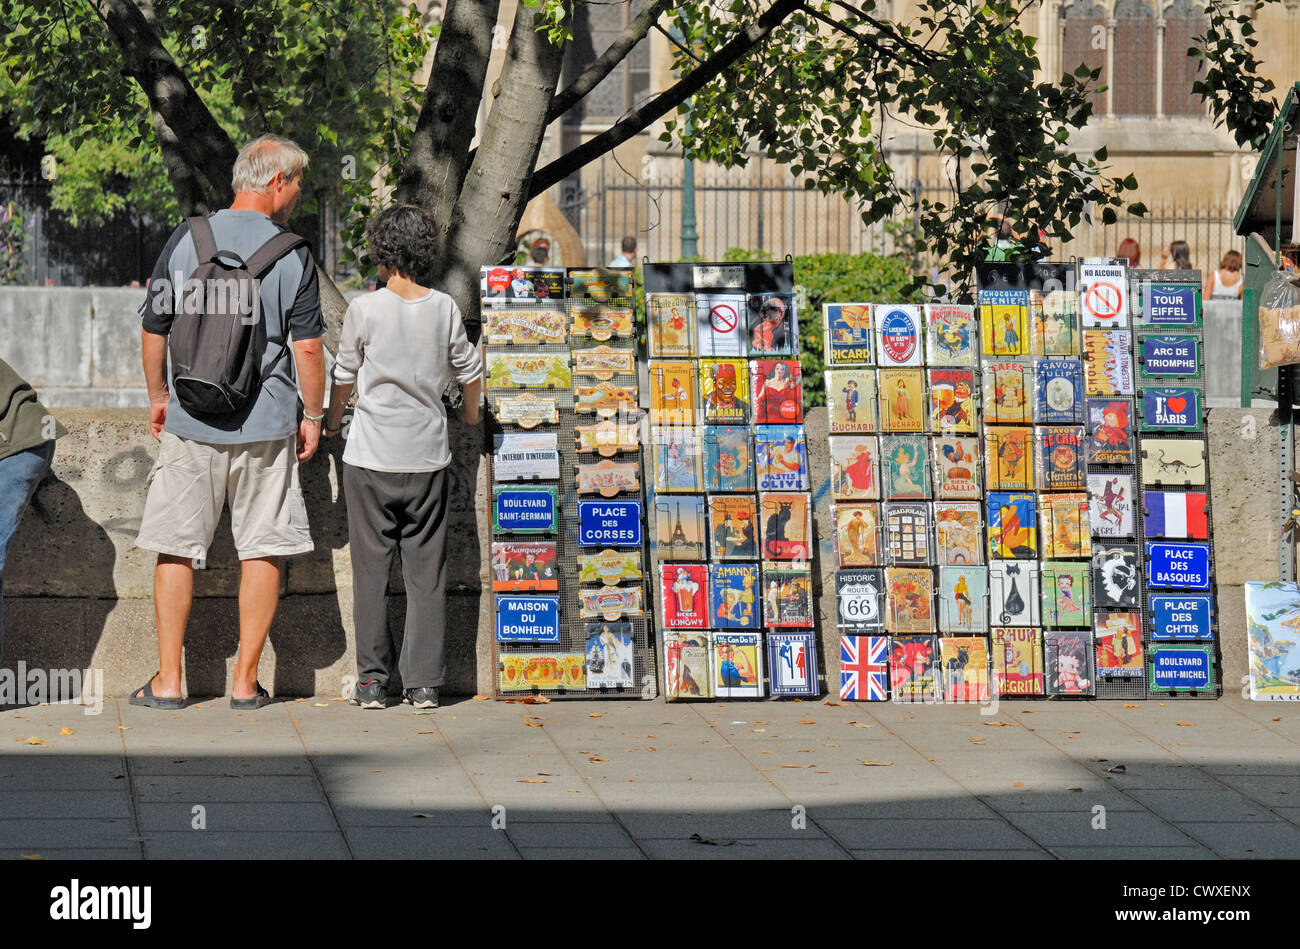 Paris, France. Stall by the river Seine selling enameled metal souvenir plaques Stock Photo